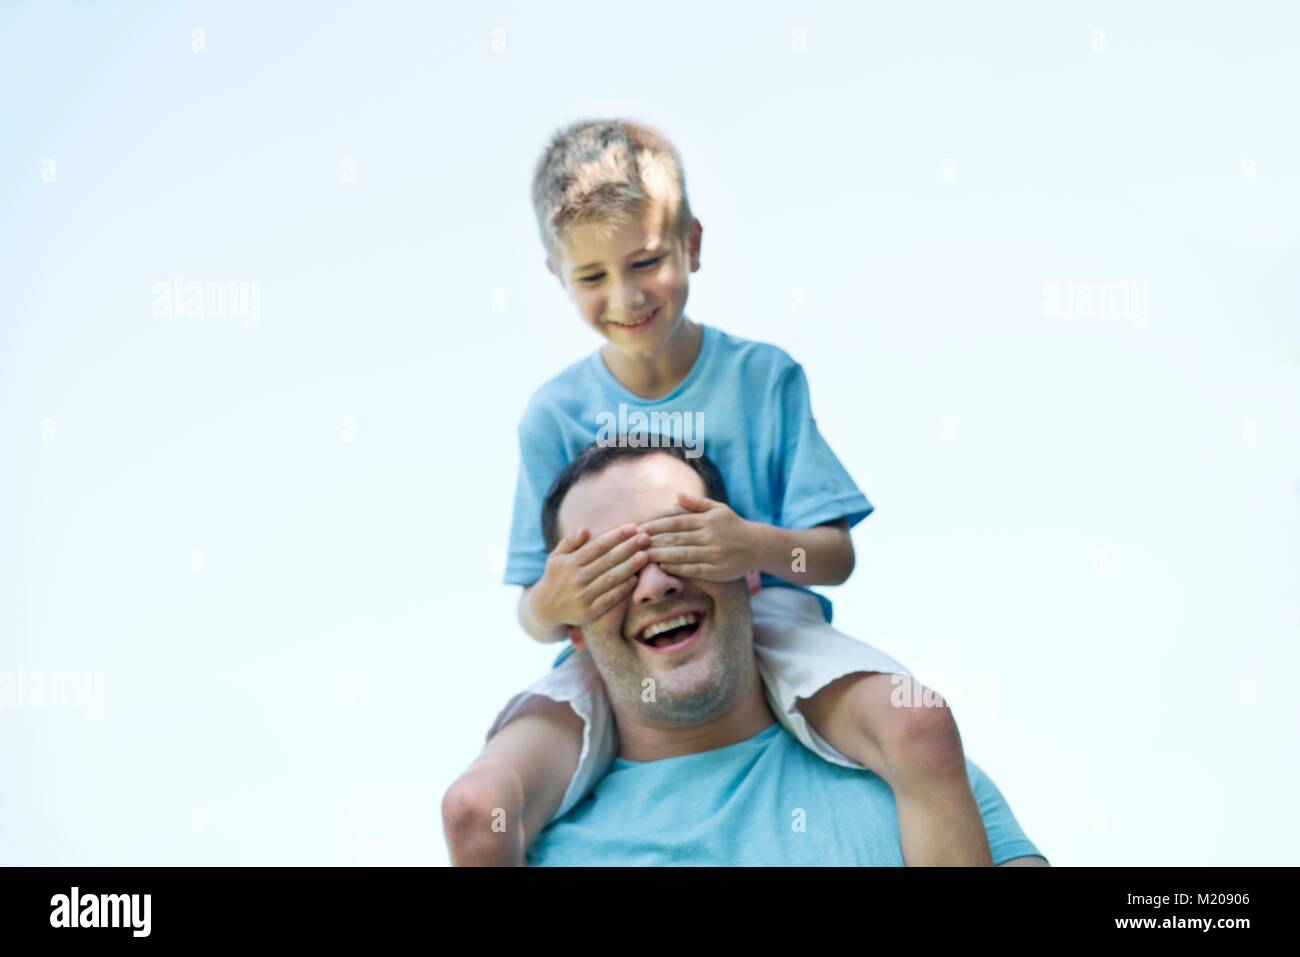 Father carrying son on shoulders, boy covering his father's eyes with hands. Stock Photo